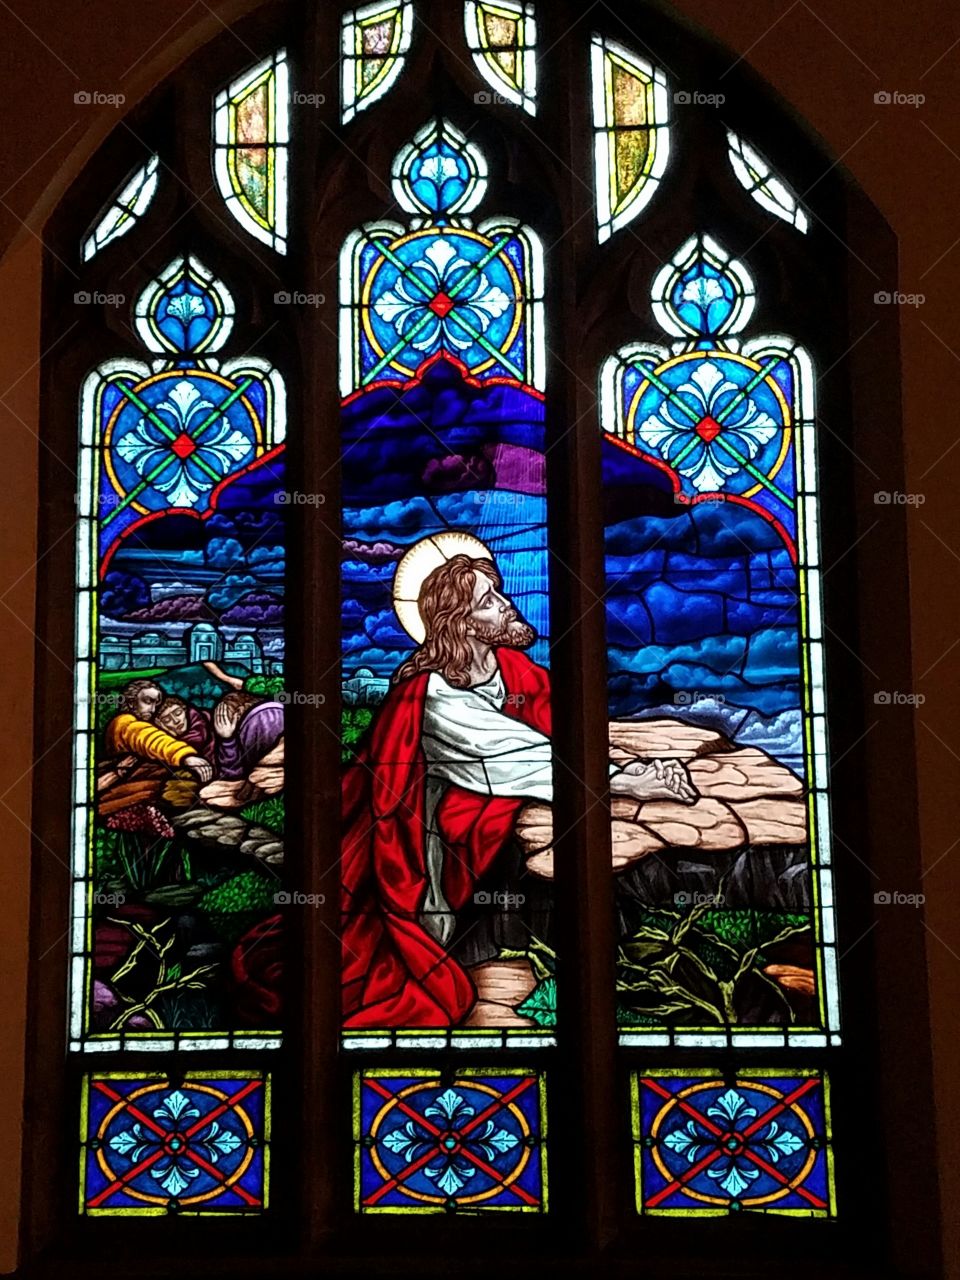 Stained Glass Window of Jesus Praying in the Garden of Gethsemane